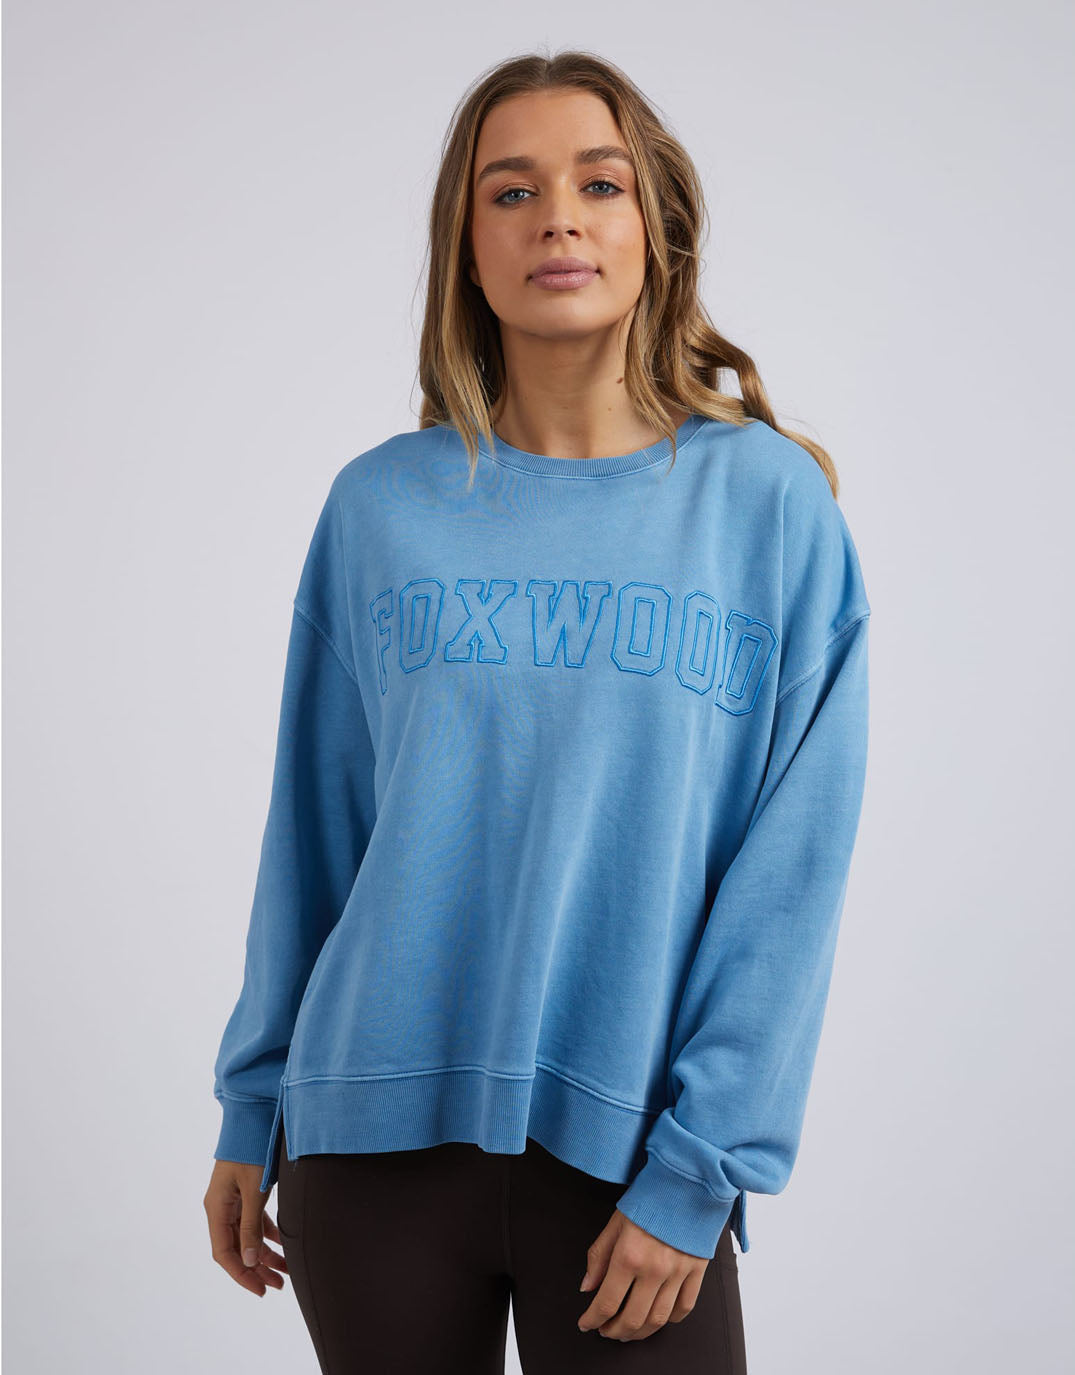 foxwood-unified-crew-blue-womens-clothing